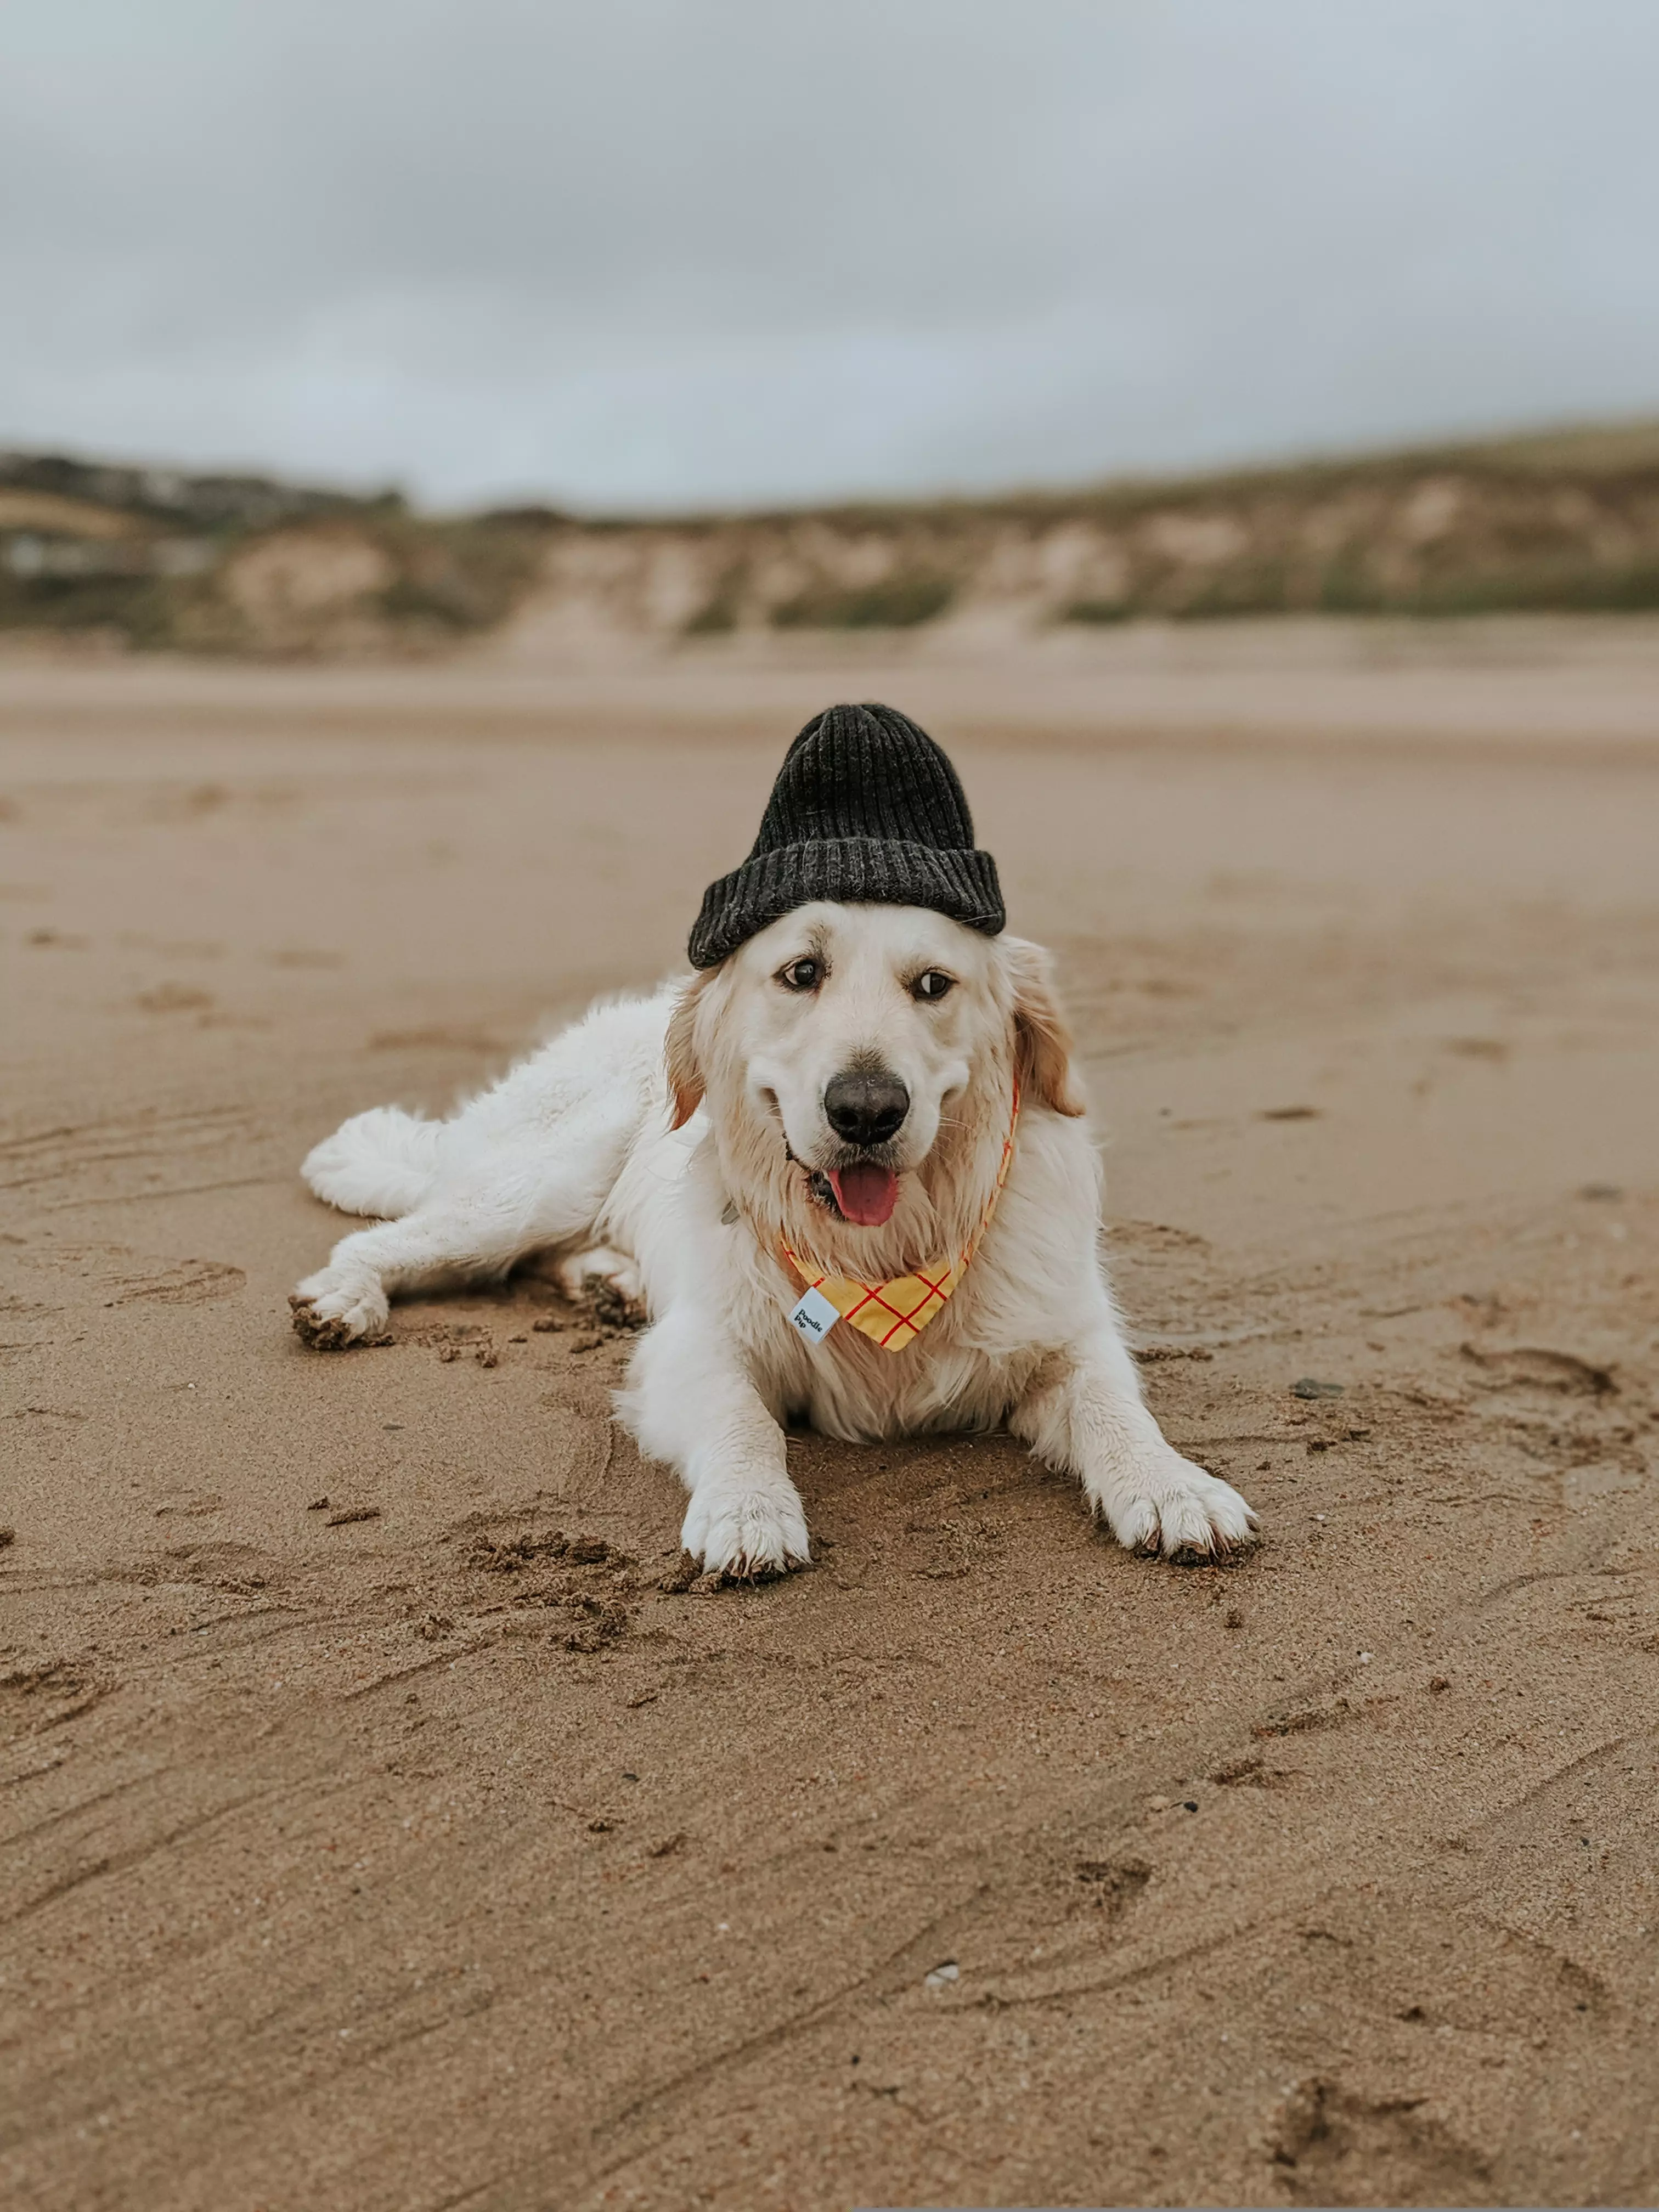 Enjoy long walks on the beach with your furry friend (